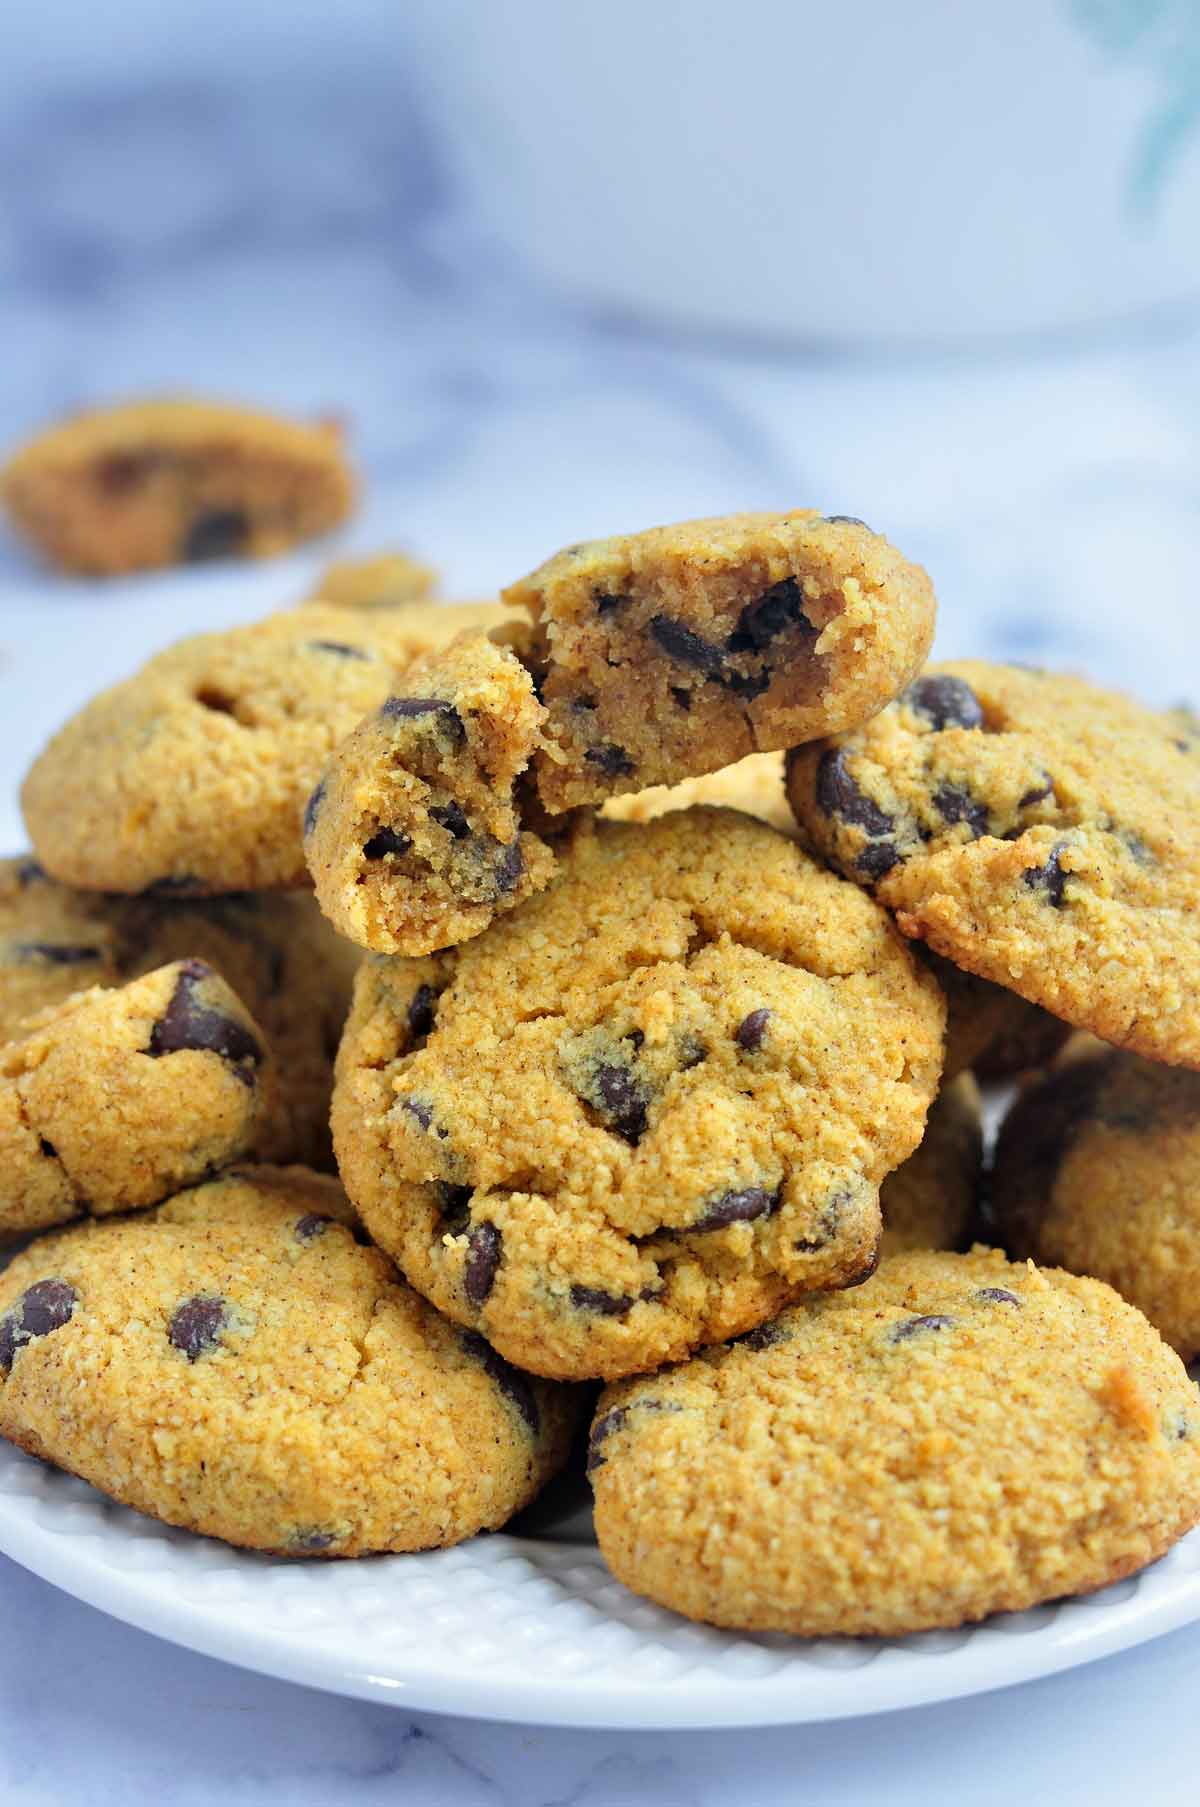 Pumpkin chocolate chip cookies in a plate.